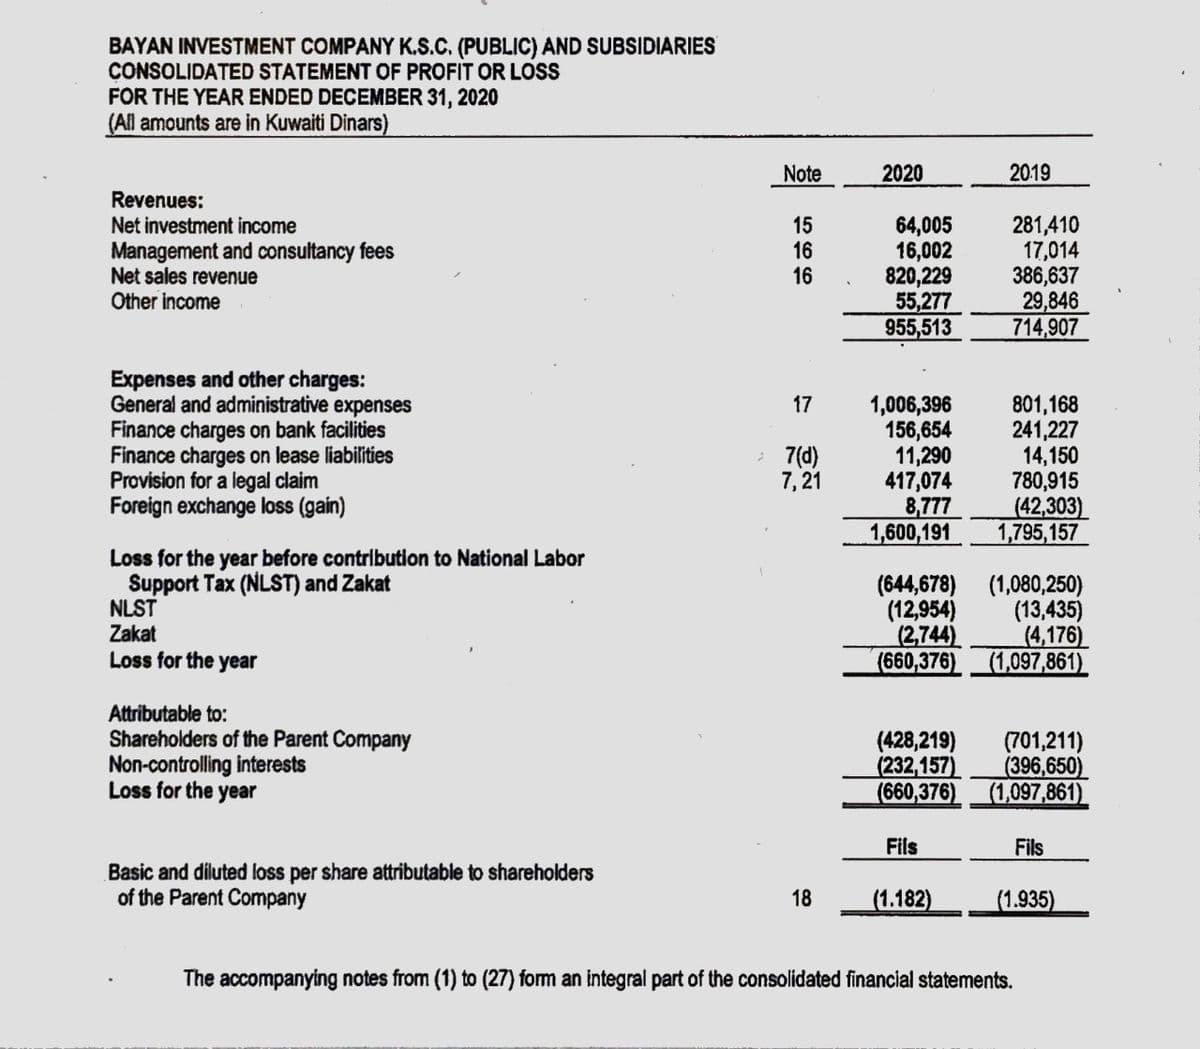 BAYAN INVESTMENT COMPANY K.S.C. (PUBLIC) AND SUBSIDIARIES
CONSOLIDATED STATEMENT OF PROFIT OR LOSS
FOR THE YEAR ENDED DECEMBER 31, 2020
(All amounts are in Kuwaiti Dinars)
Note
2020
2019
Revenues:
Net investment income
Management and consultancy fees
Net sales revenue
Other income
15
16
16
64,005
16,002
820,229
55,277
955,513
281,410
17,014
386,637
29,846
714,907
Expenses and other charges:
General and administrative expenses
Finance charges on bank facilities
Finance charges on lease liabilities
Provision for a legal claim
Foreign exchange loss (gain)
801,168
241,227
14,150
780,915
(42,303)
1,795,157
17
1,006,396
156,654
11,290
417,074
8,777
1,600,191
7(d)
7, 21
Loss for the year before contribution to National Labor
Support Tax (NLST) and Zakat
NLST
(644,678) (1,080,250)
(12,954)
(13,435)
Zakat
(2,744)
(4,176)
Loss for the year
(960,376)
(1,097,861)
Attributable to:
Shareholders of the Parent Company
Non-controlling interests
Loss for the year
(428,219)
(232,157)
(660,376)
(701,211)
(396,650)
(1,097,861)
Fils
Fils
Basic and diluted loss per share attributable to shareholders
of the Parent Company
18
(1.182)
(1.935)
The accompanying notes from (1) to (27) form an integral part of the consolidated financial statements.
